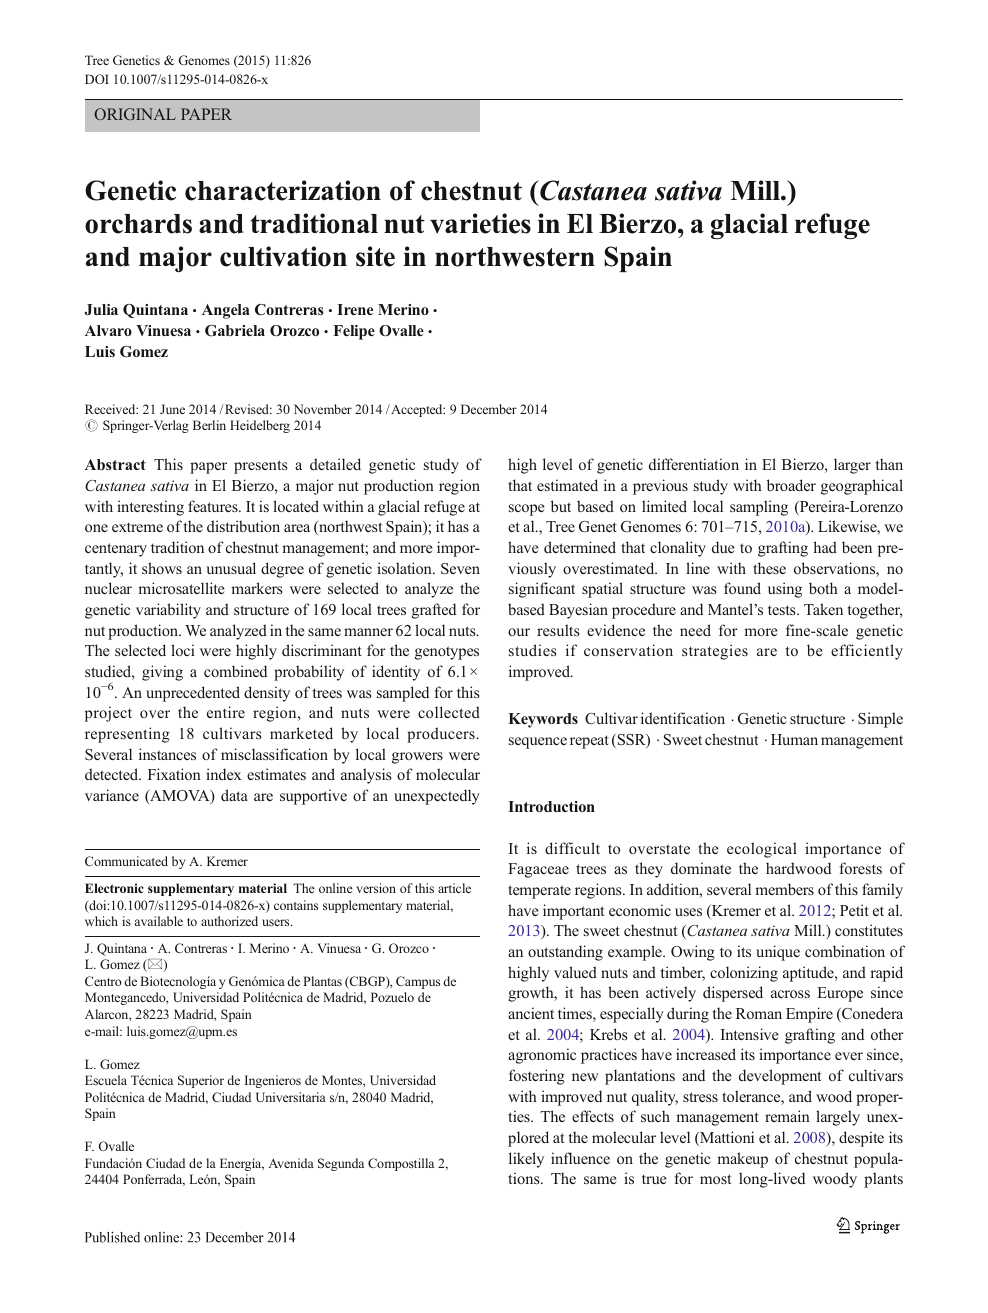 Genetic Characterization Of Chestnut Castanea Sativa Mill Orchards And Traditional Nut Varieties In El Bierzo A Glacial Refuge And Major Cultivation Site In Northwestern Spain Topic Of Research Paper In Biological